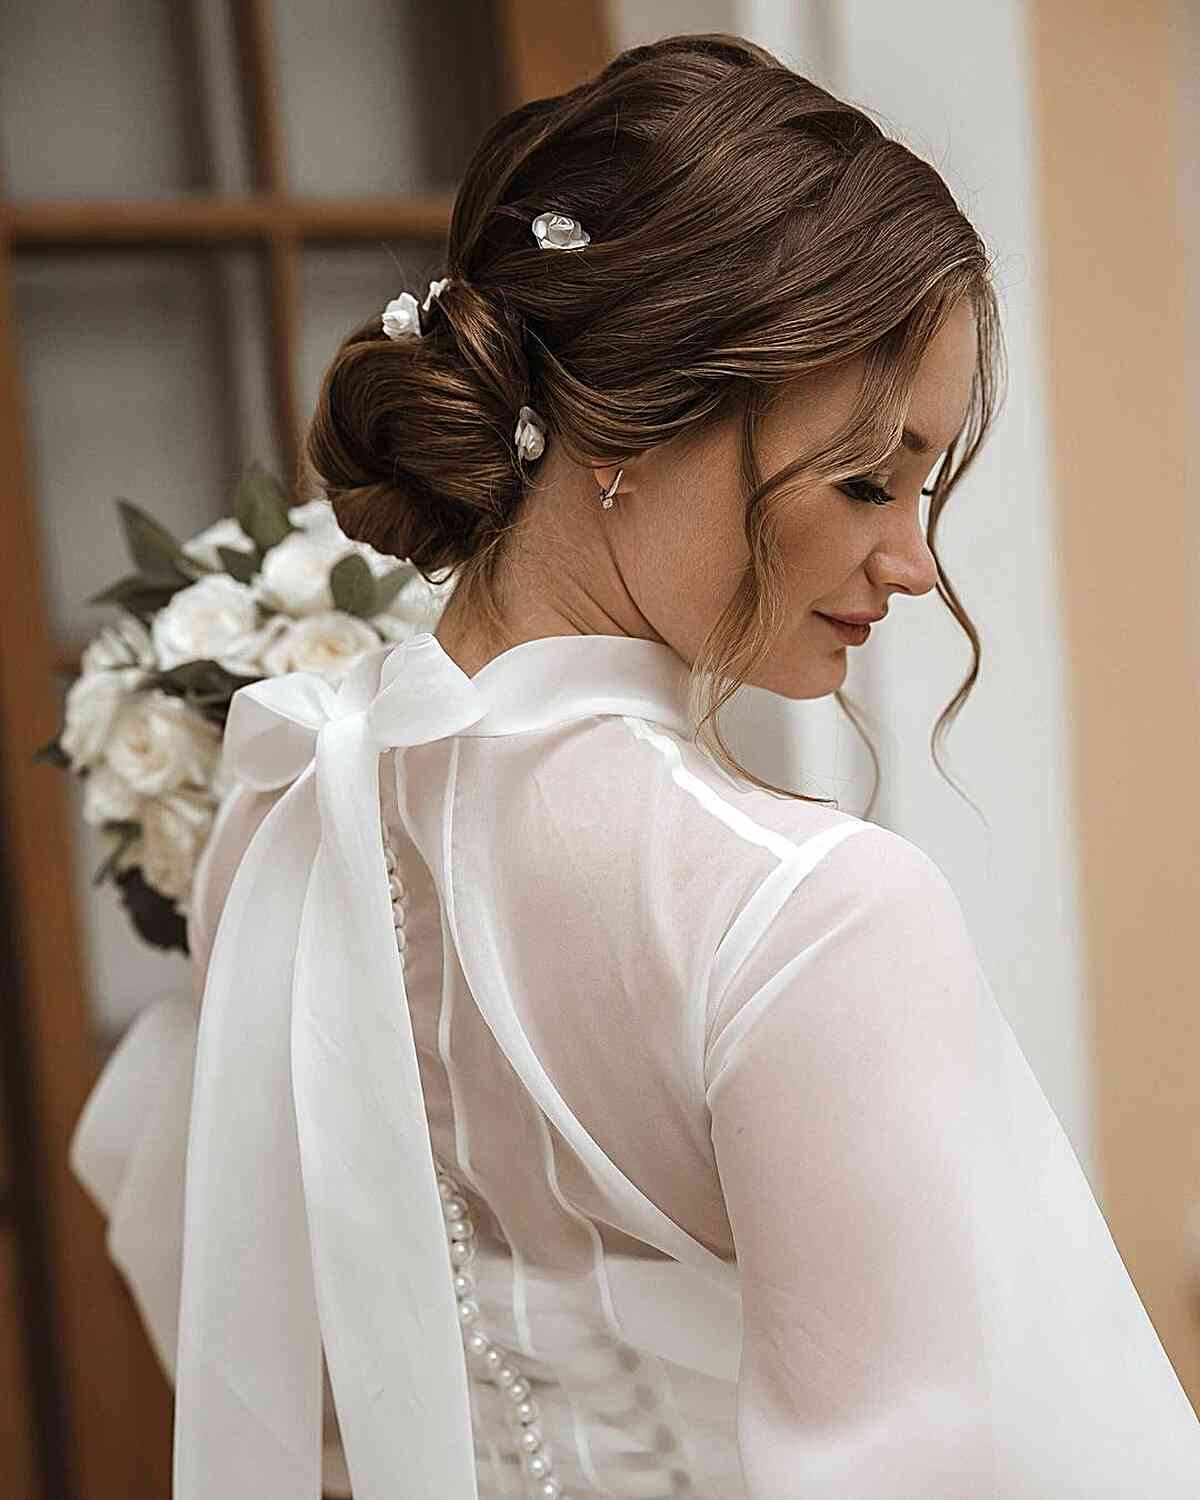 Cute Bun Updo with Face-Framing Tendrils and Accessories for a Wedding